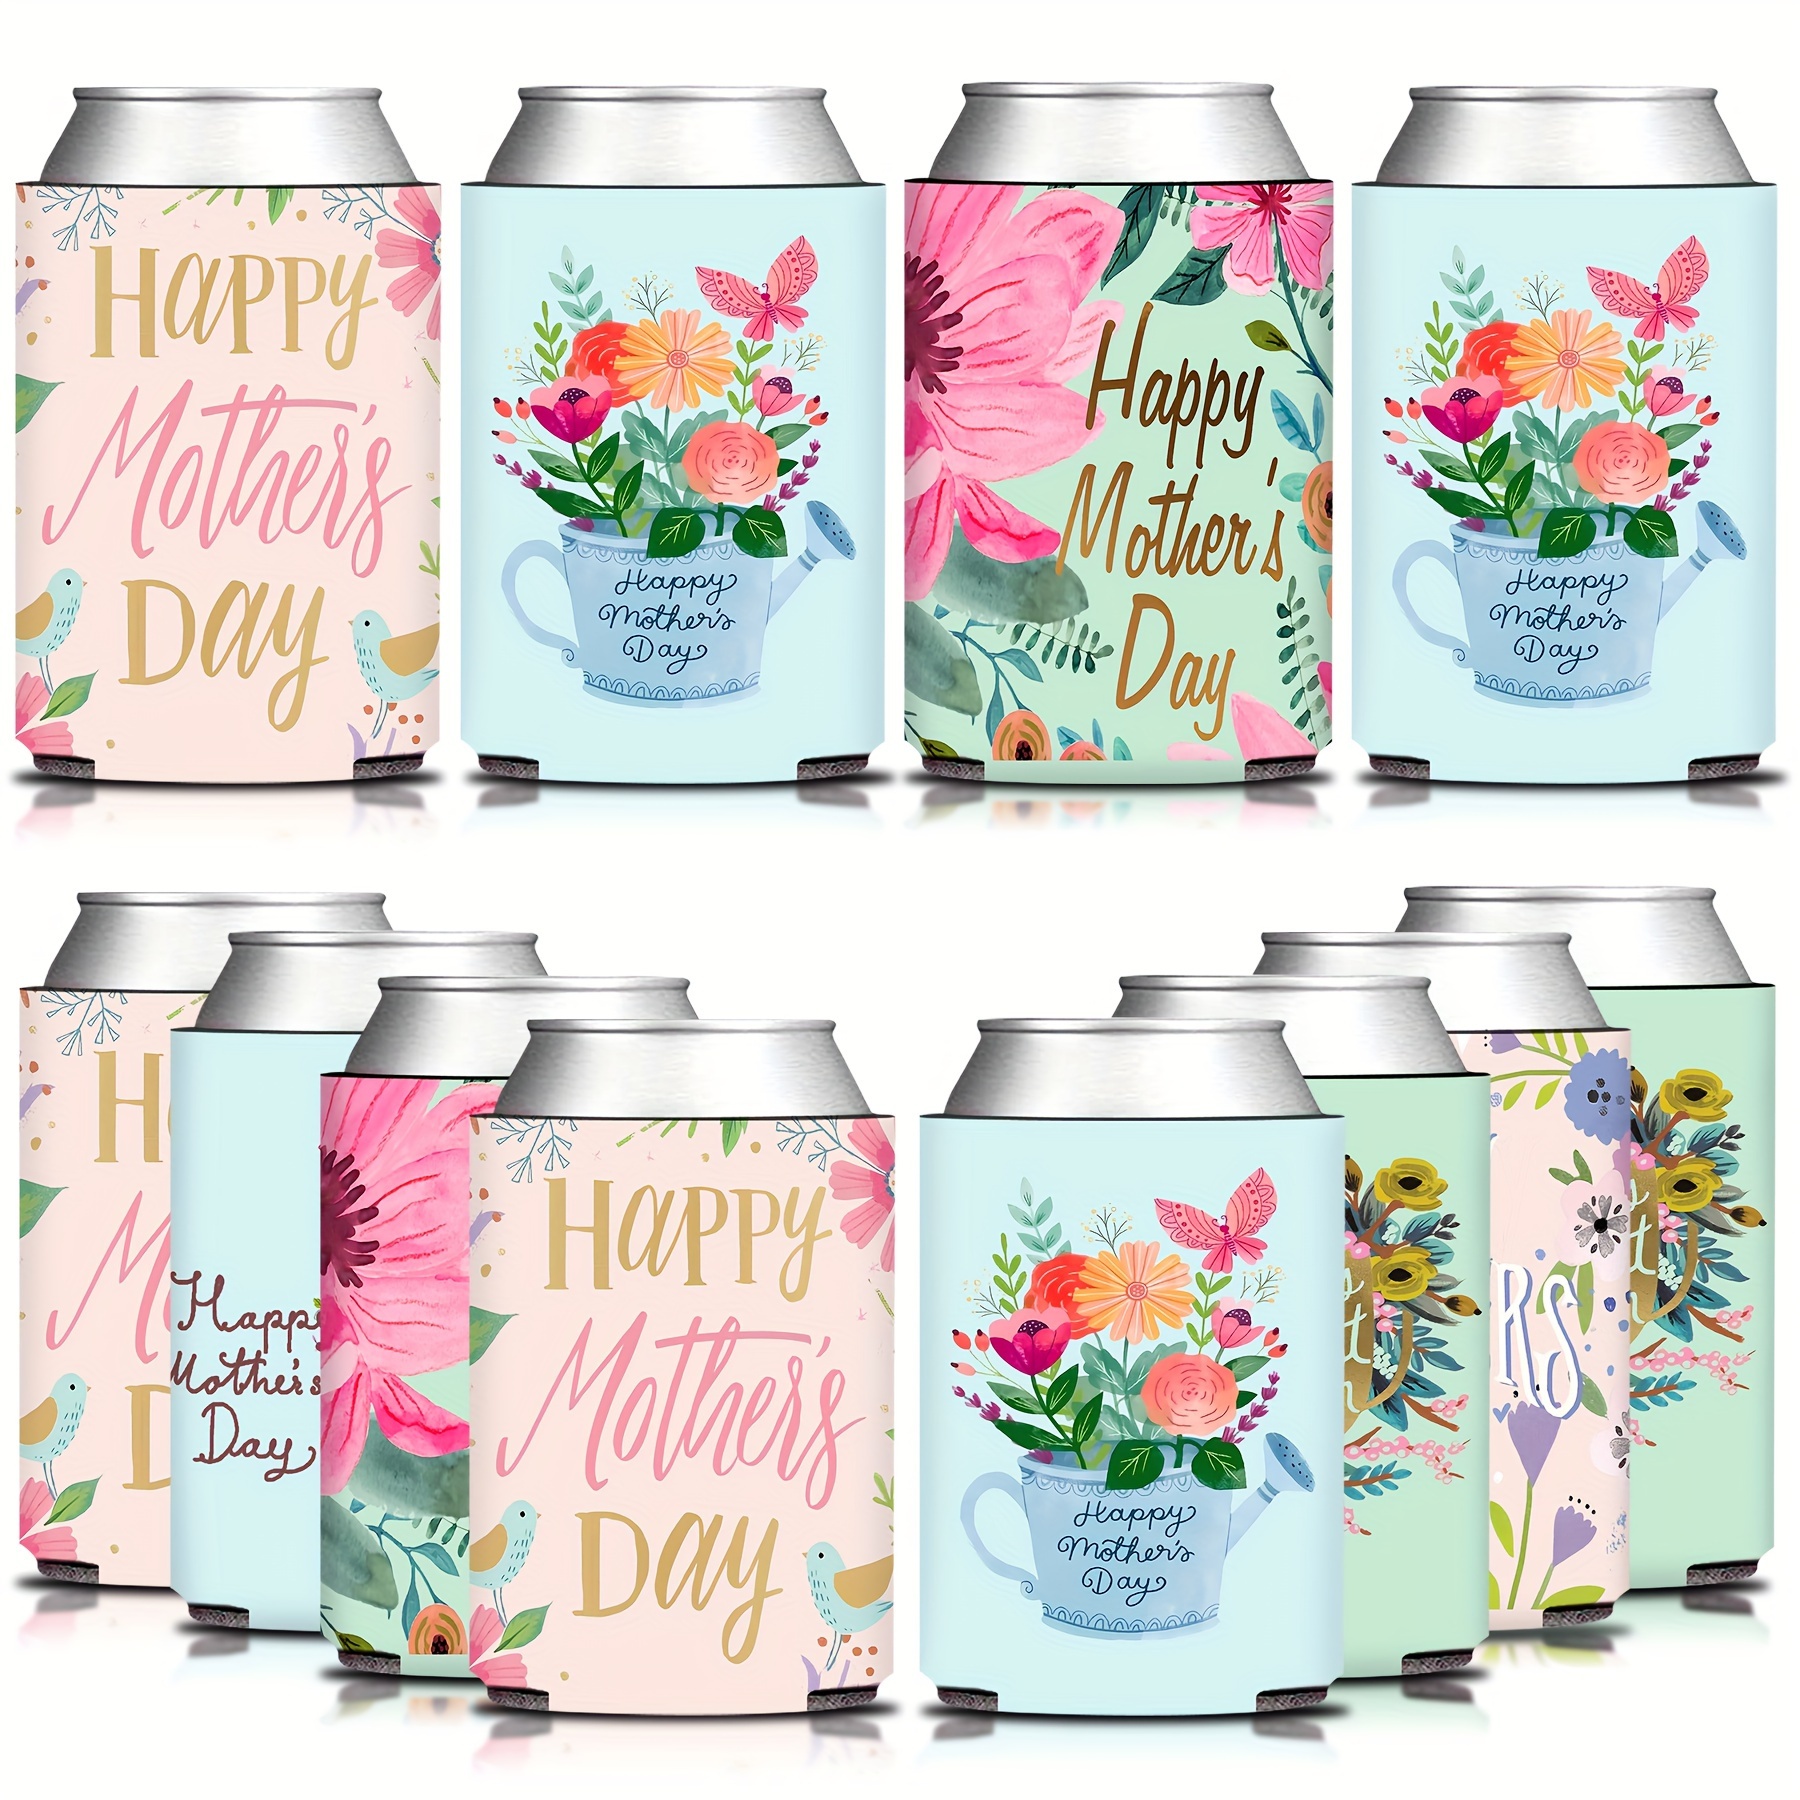 

12pcs/set, Retro Floral Happy Mother's Day Can Cooler Sleeves Party Favor Gifts- Colorful Thankful Mother Day Party Beverage Drink Can Cover Drink Holders